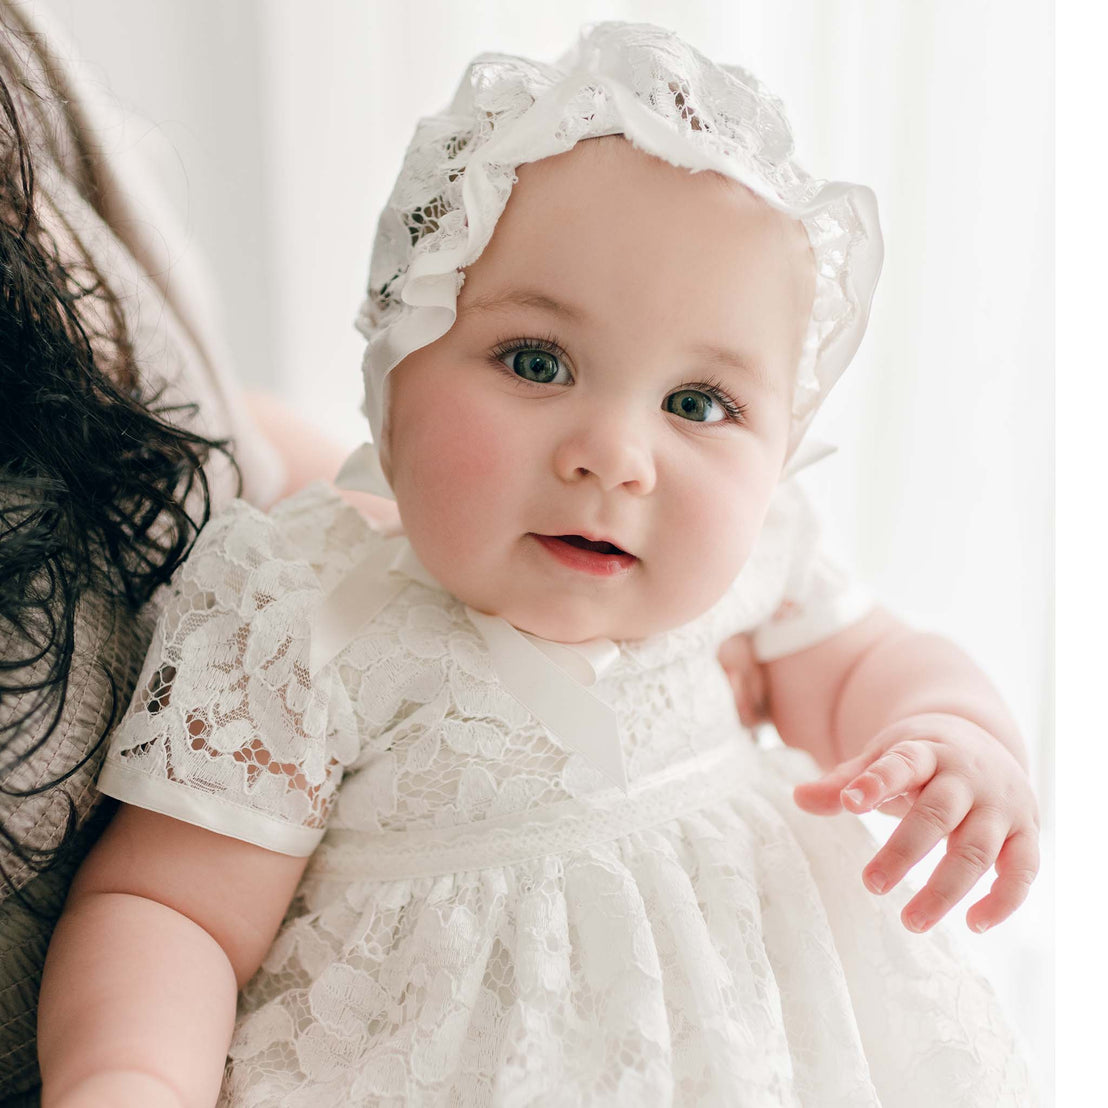 A close-up of a baby girl wearing the Rose Christening Gown & Bonnet, looking directly at the camera with bright blue eyes and a subtle smile. The gown is made with a light ivory lace over a soft cotton lining.